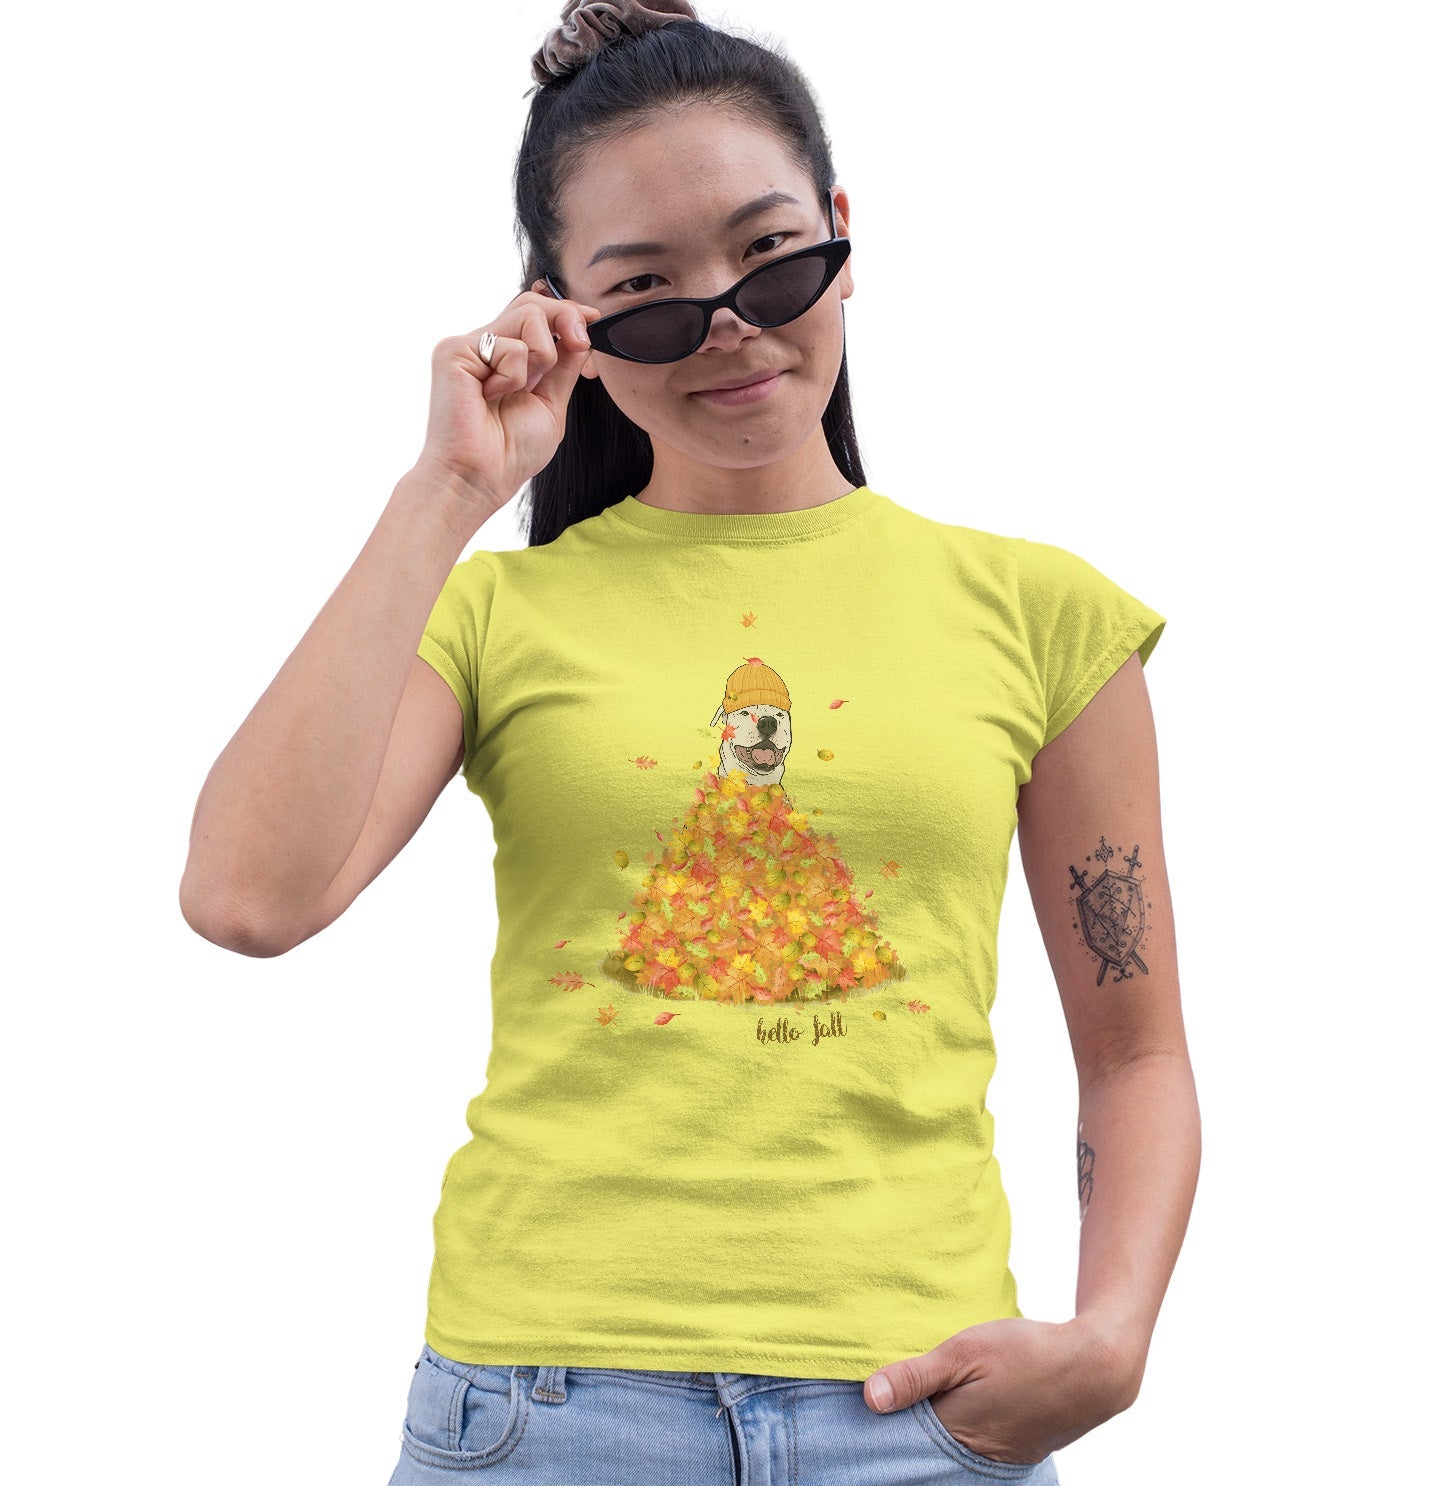 Leaf Pile and Pit Bull - Women's Fitted T-Shirt